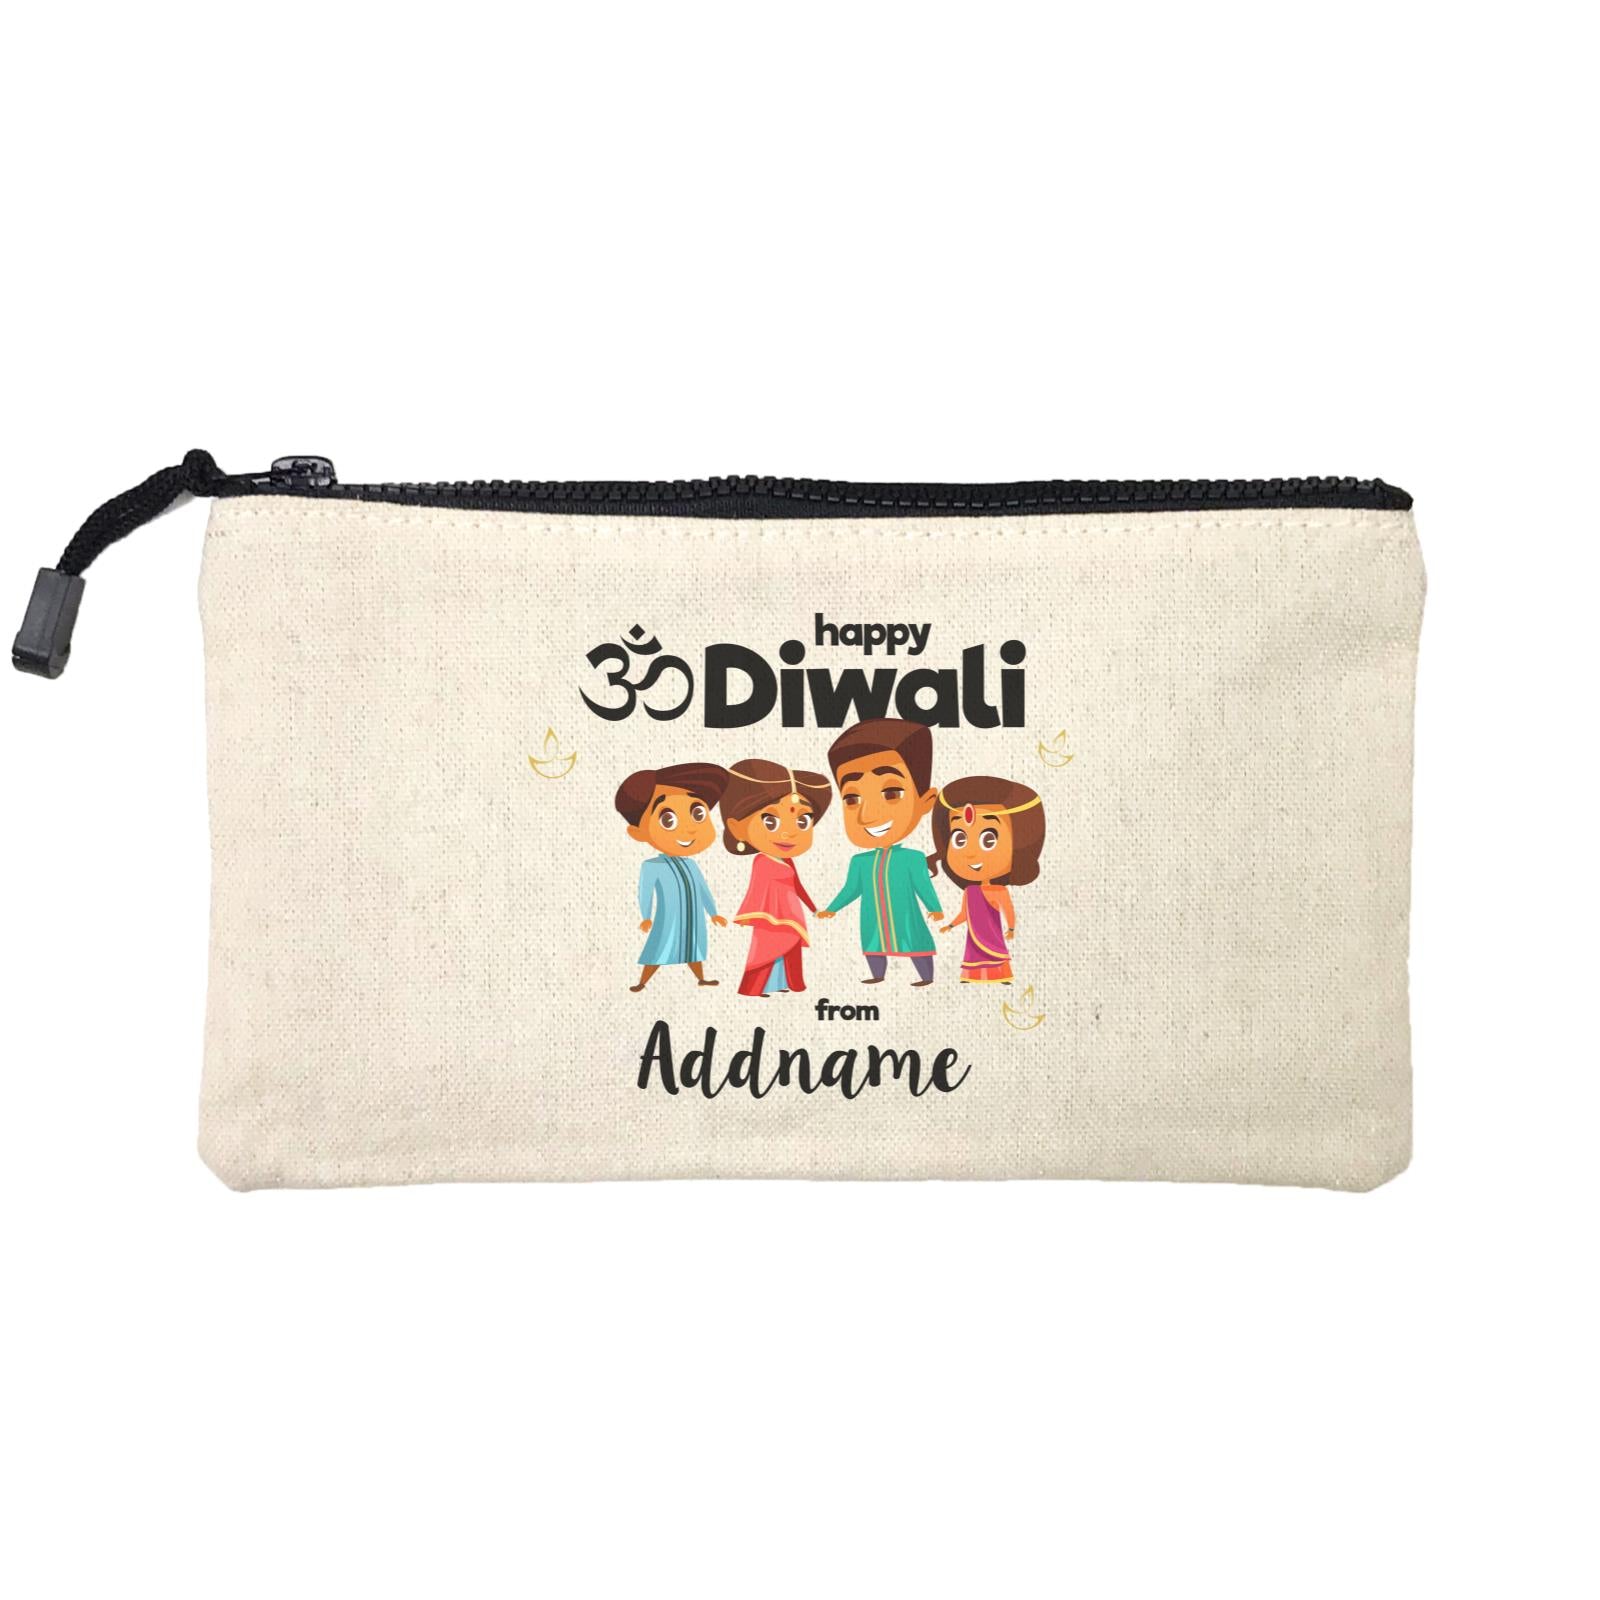 Cute Family Of Four OM Happy Diwali From Addname Mini Accessories Stationery Pouch